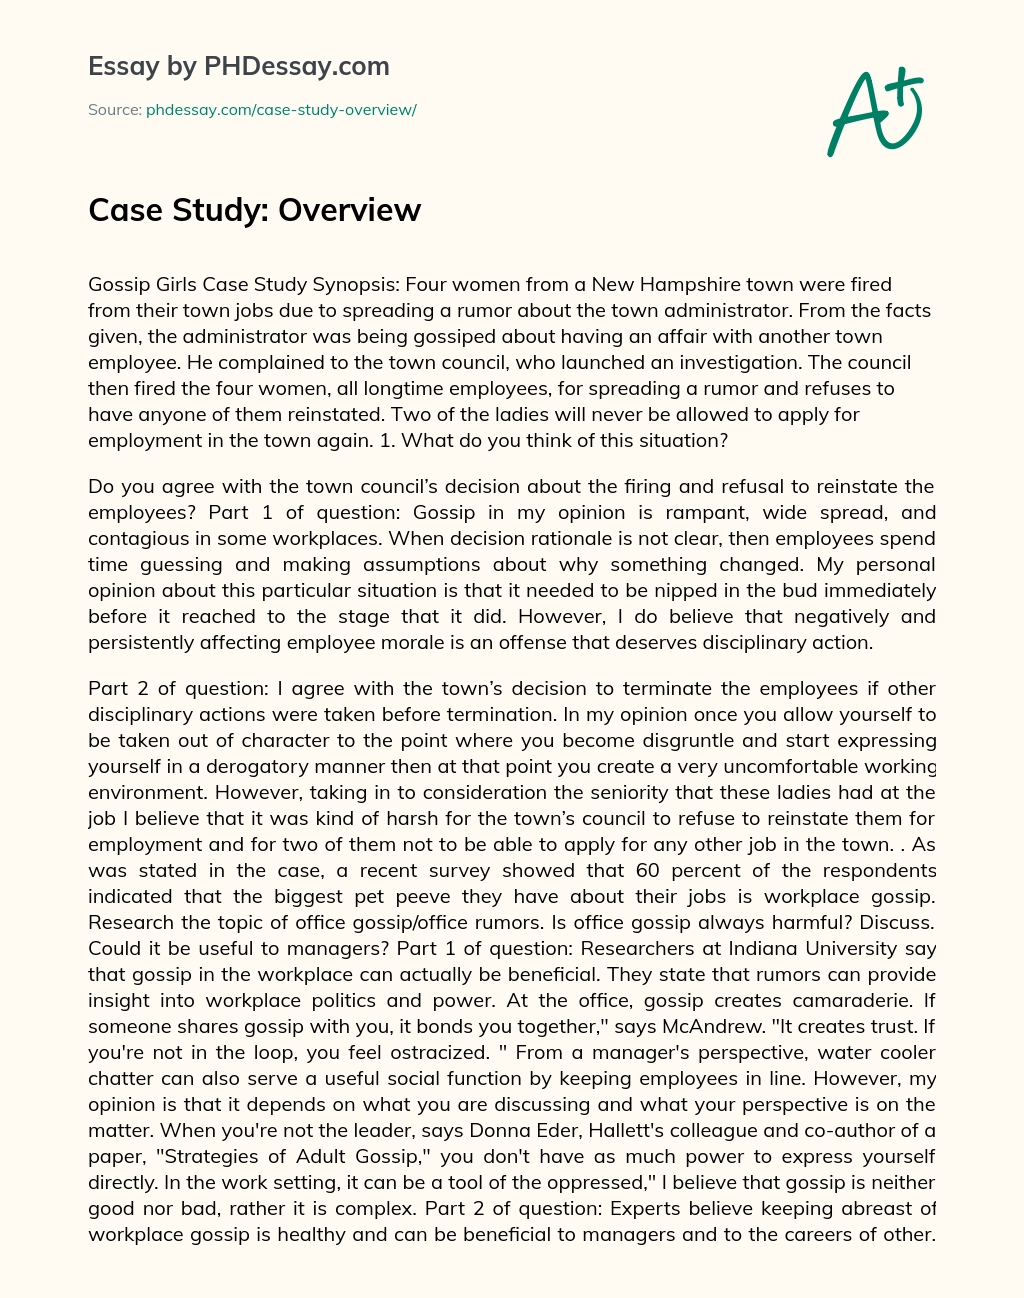 Case Study: Overview essay